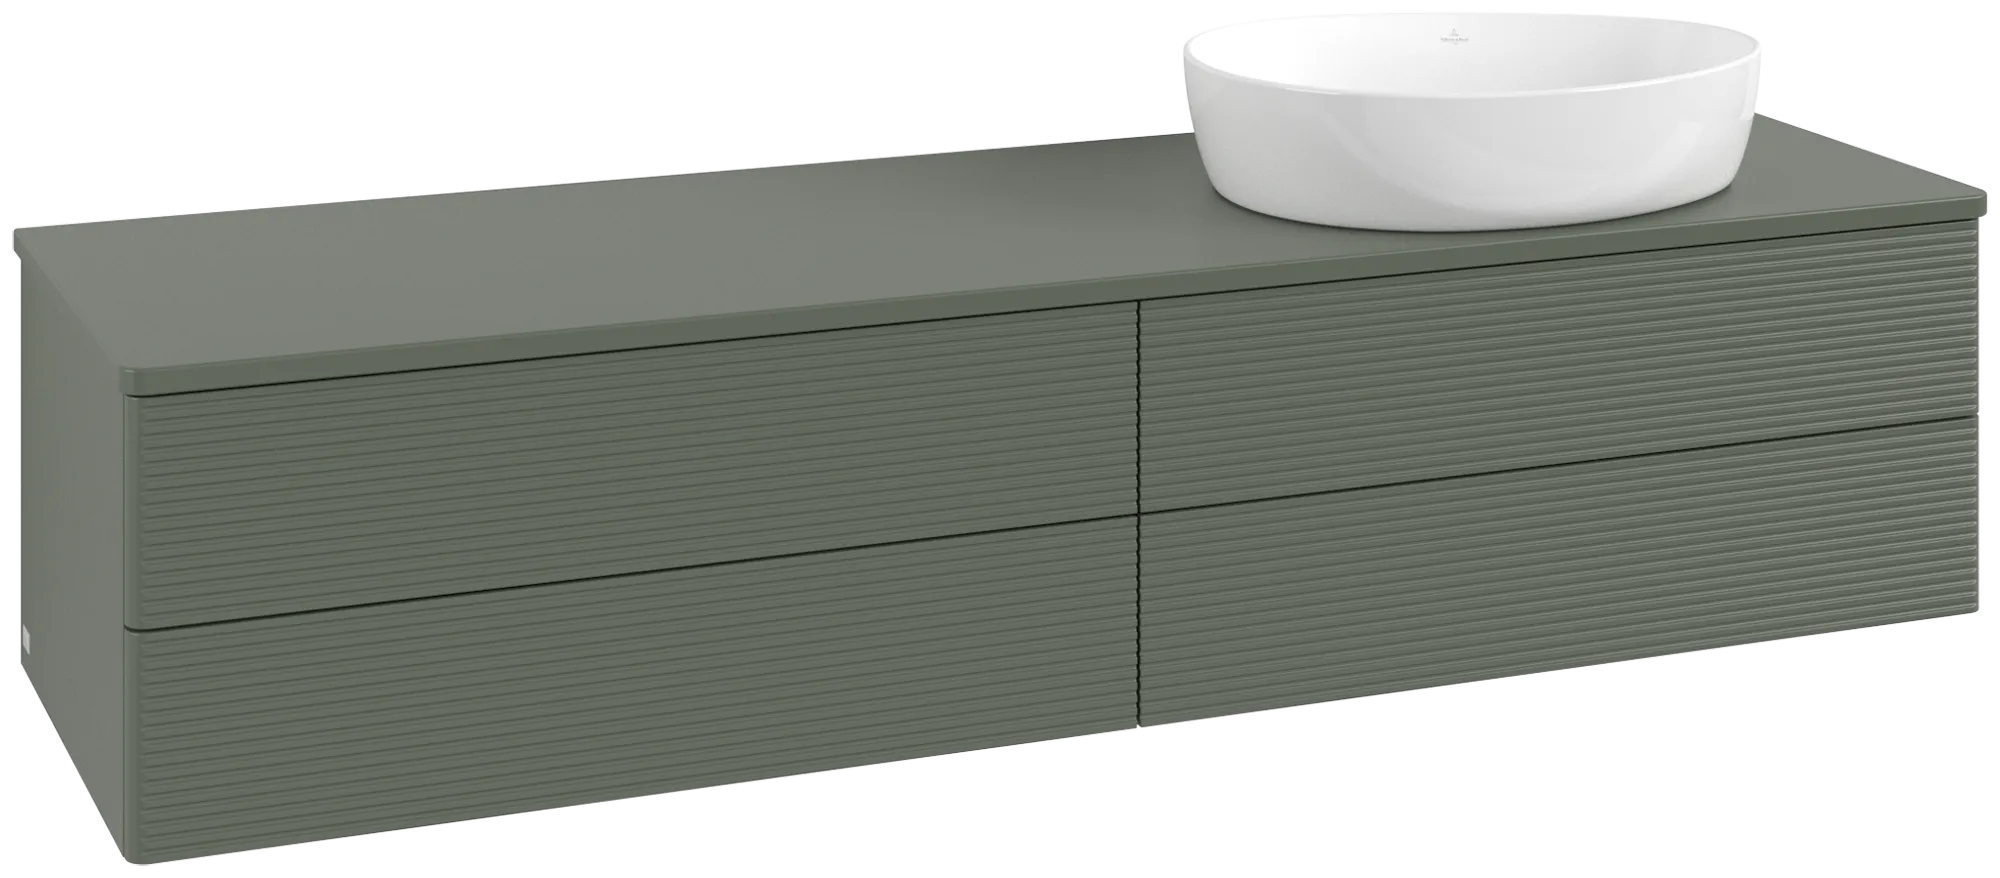 Picture of VILLEROY BOCH Antao Vanity unit, 4 pull-out compartments, 1600 x 360 x 500 mm, Front with grain texture, Leaf Green Matt Lacquer / Leaf Green Matt Lacquer #K27150HL